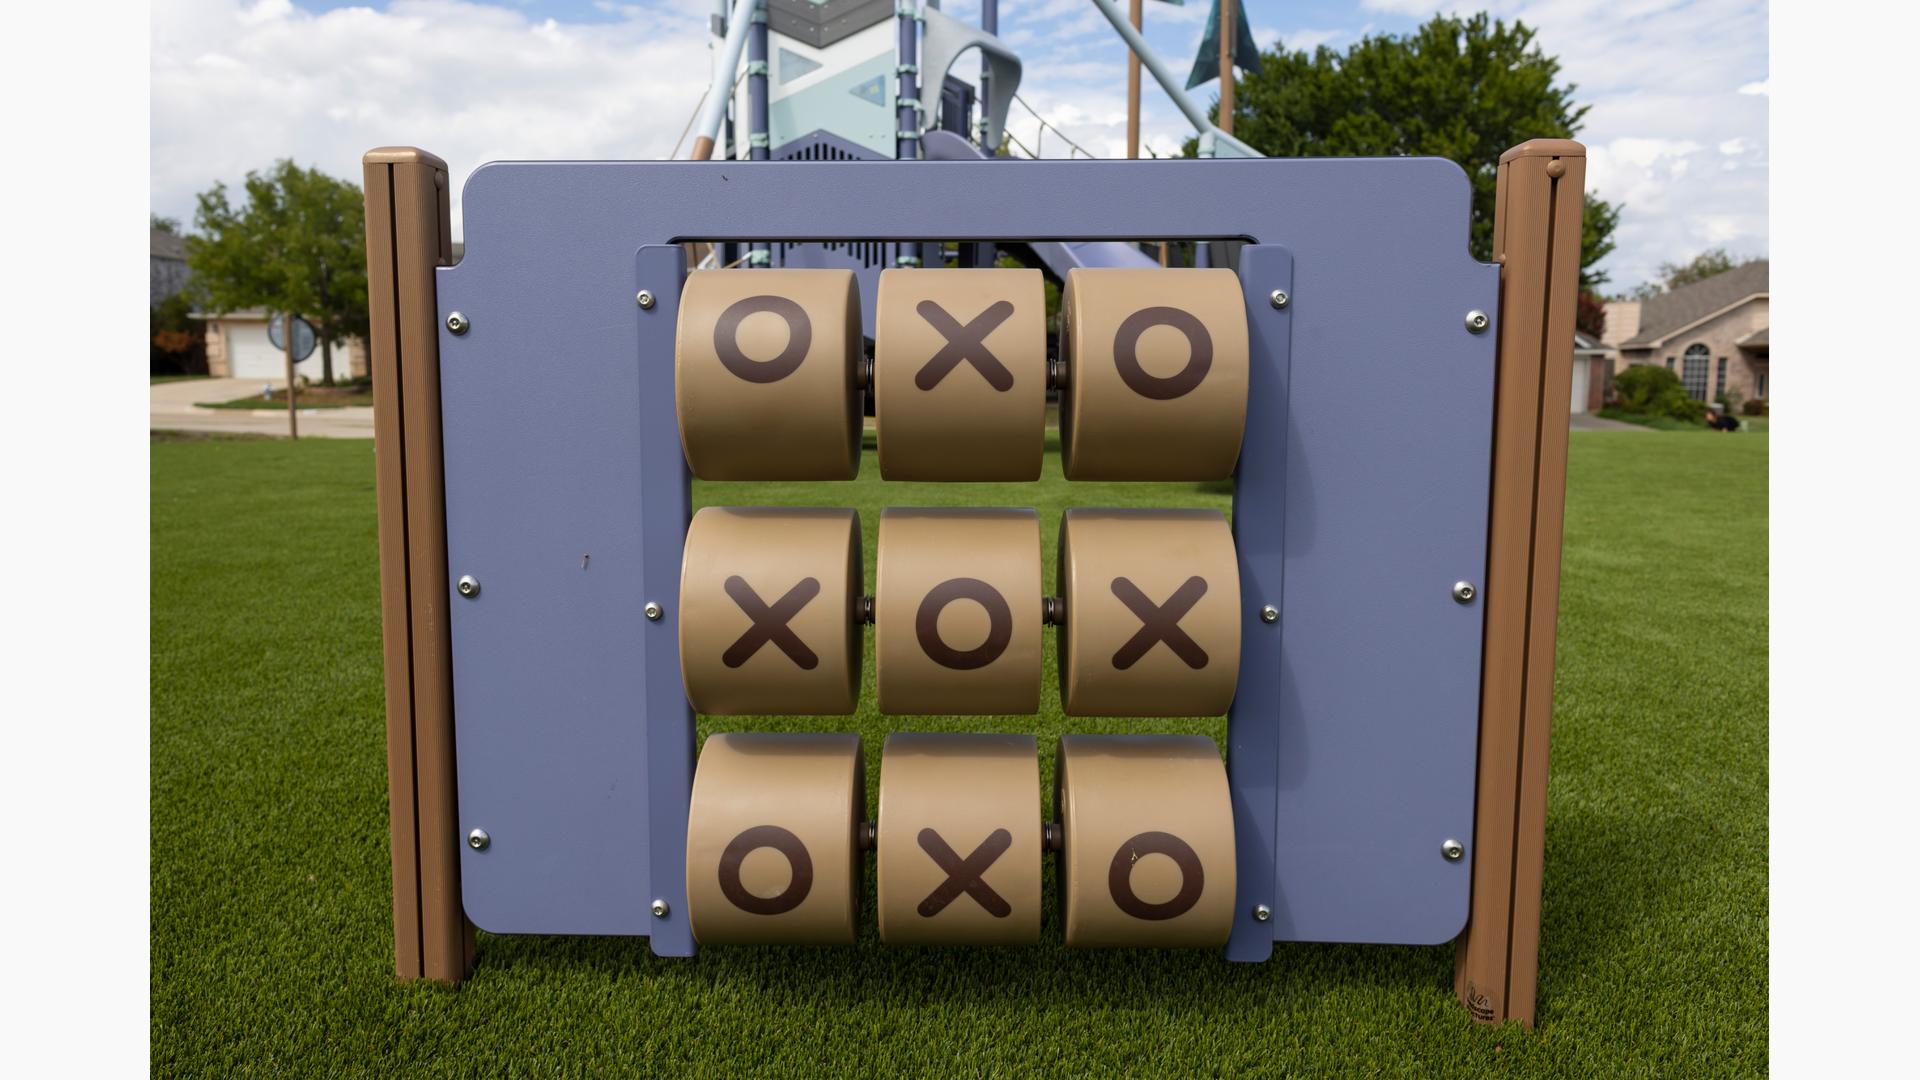 Freestanding Tic-Tac-Toe Panel with Posts 